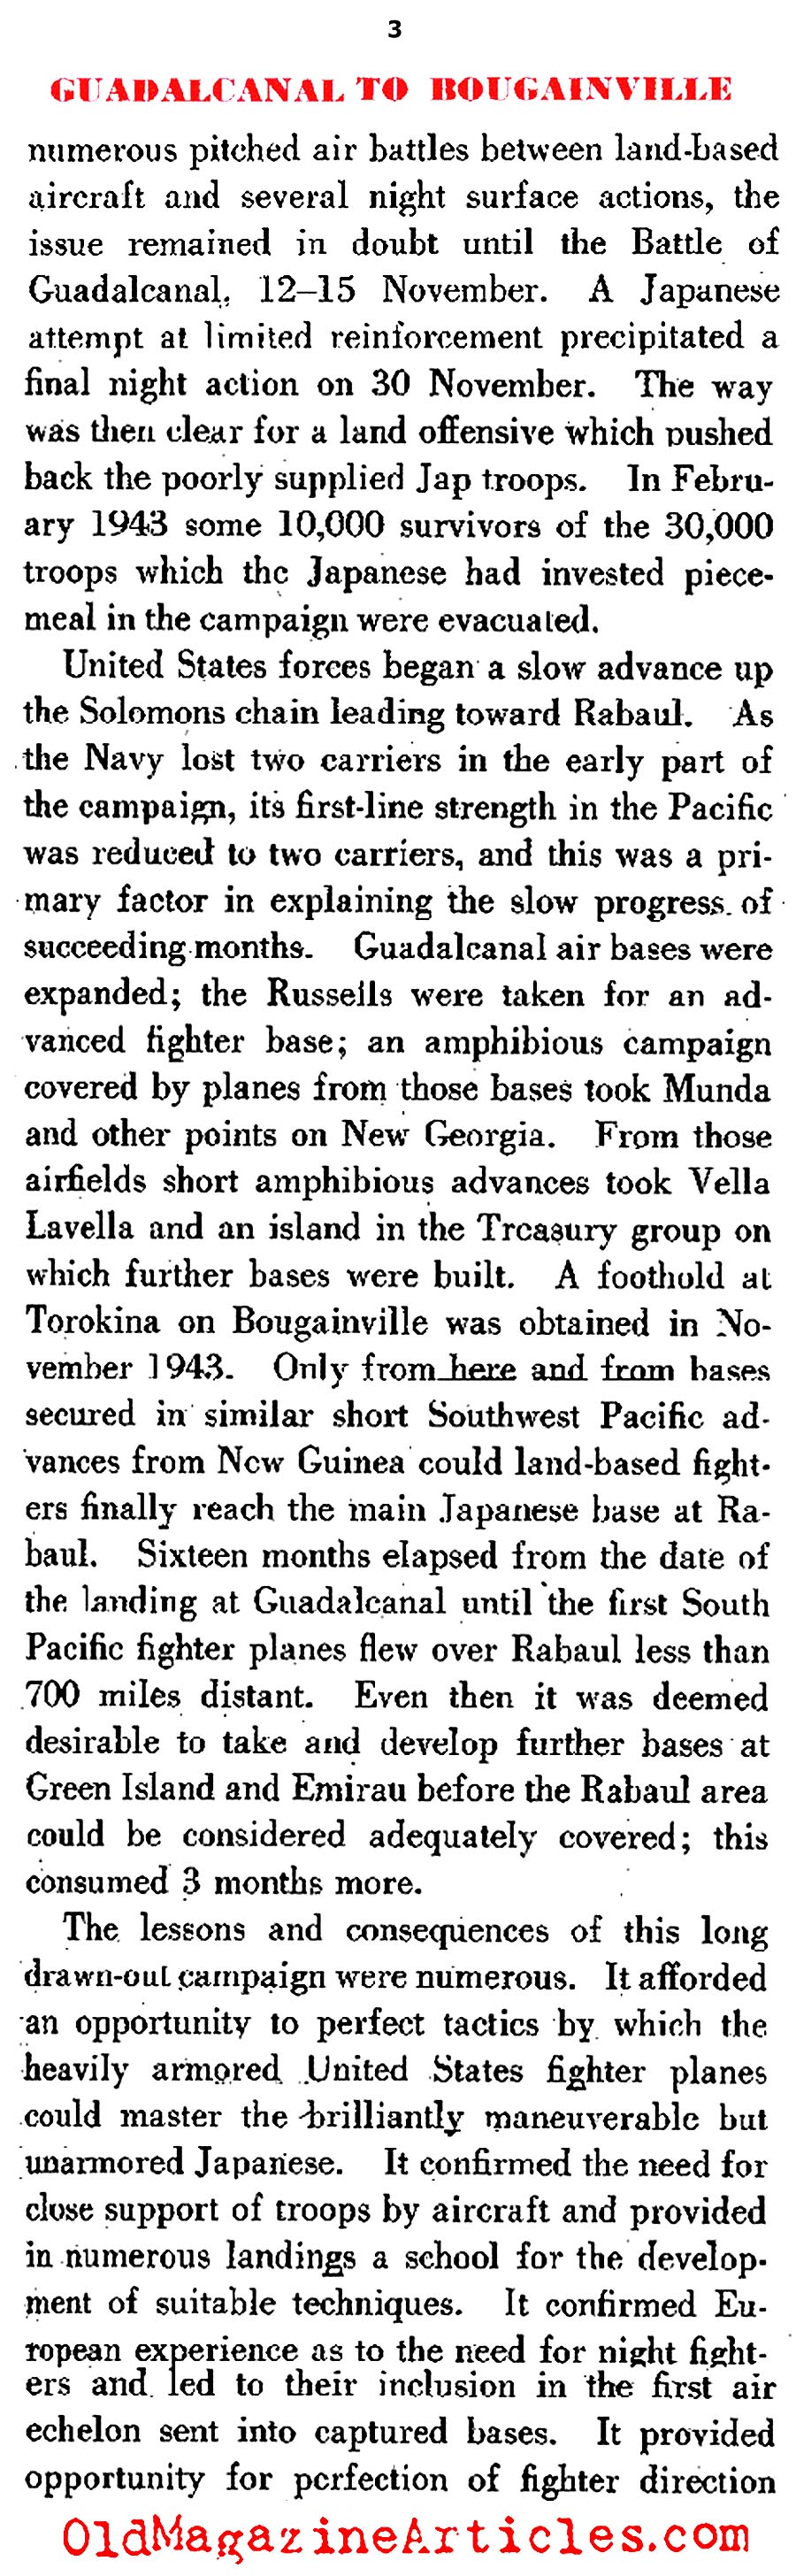 Gaudalcanal to Bougainville and the Progress of the U.S. Navy (Dept. of the Navy, 1947)